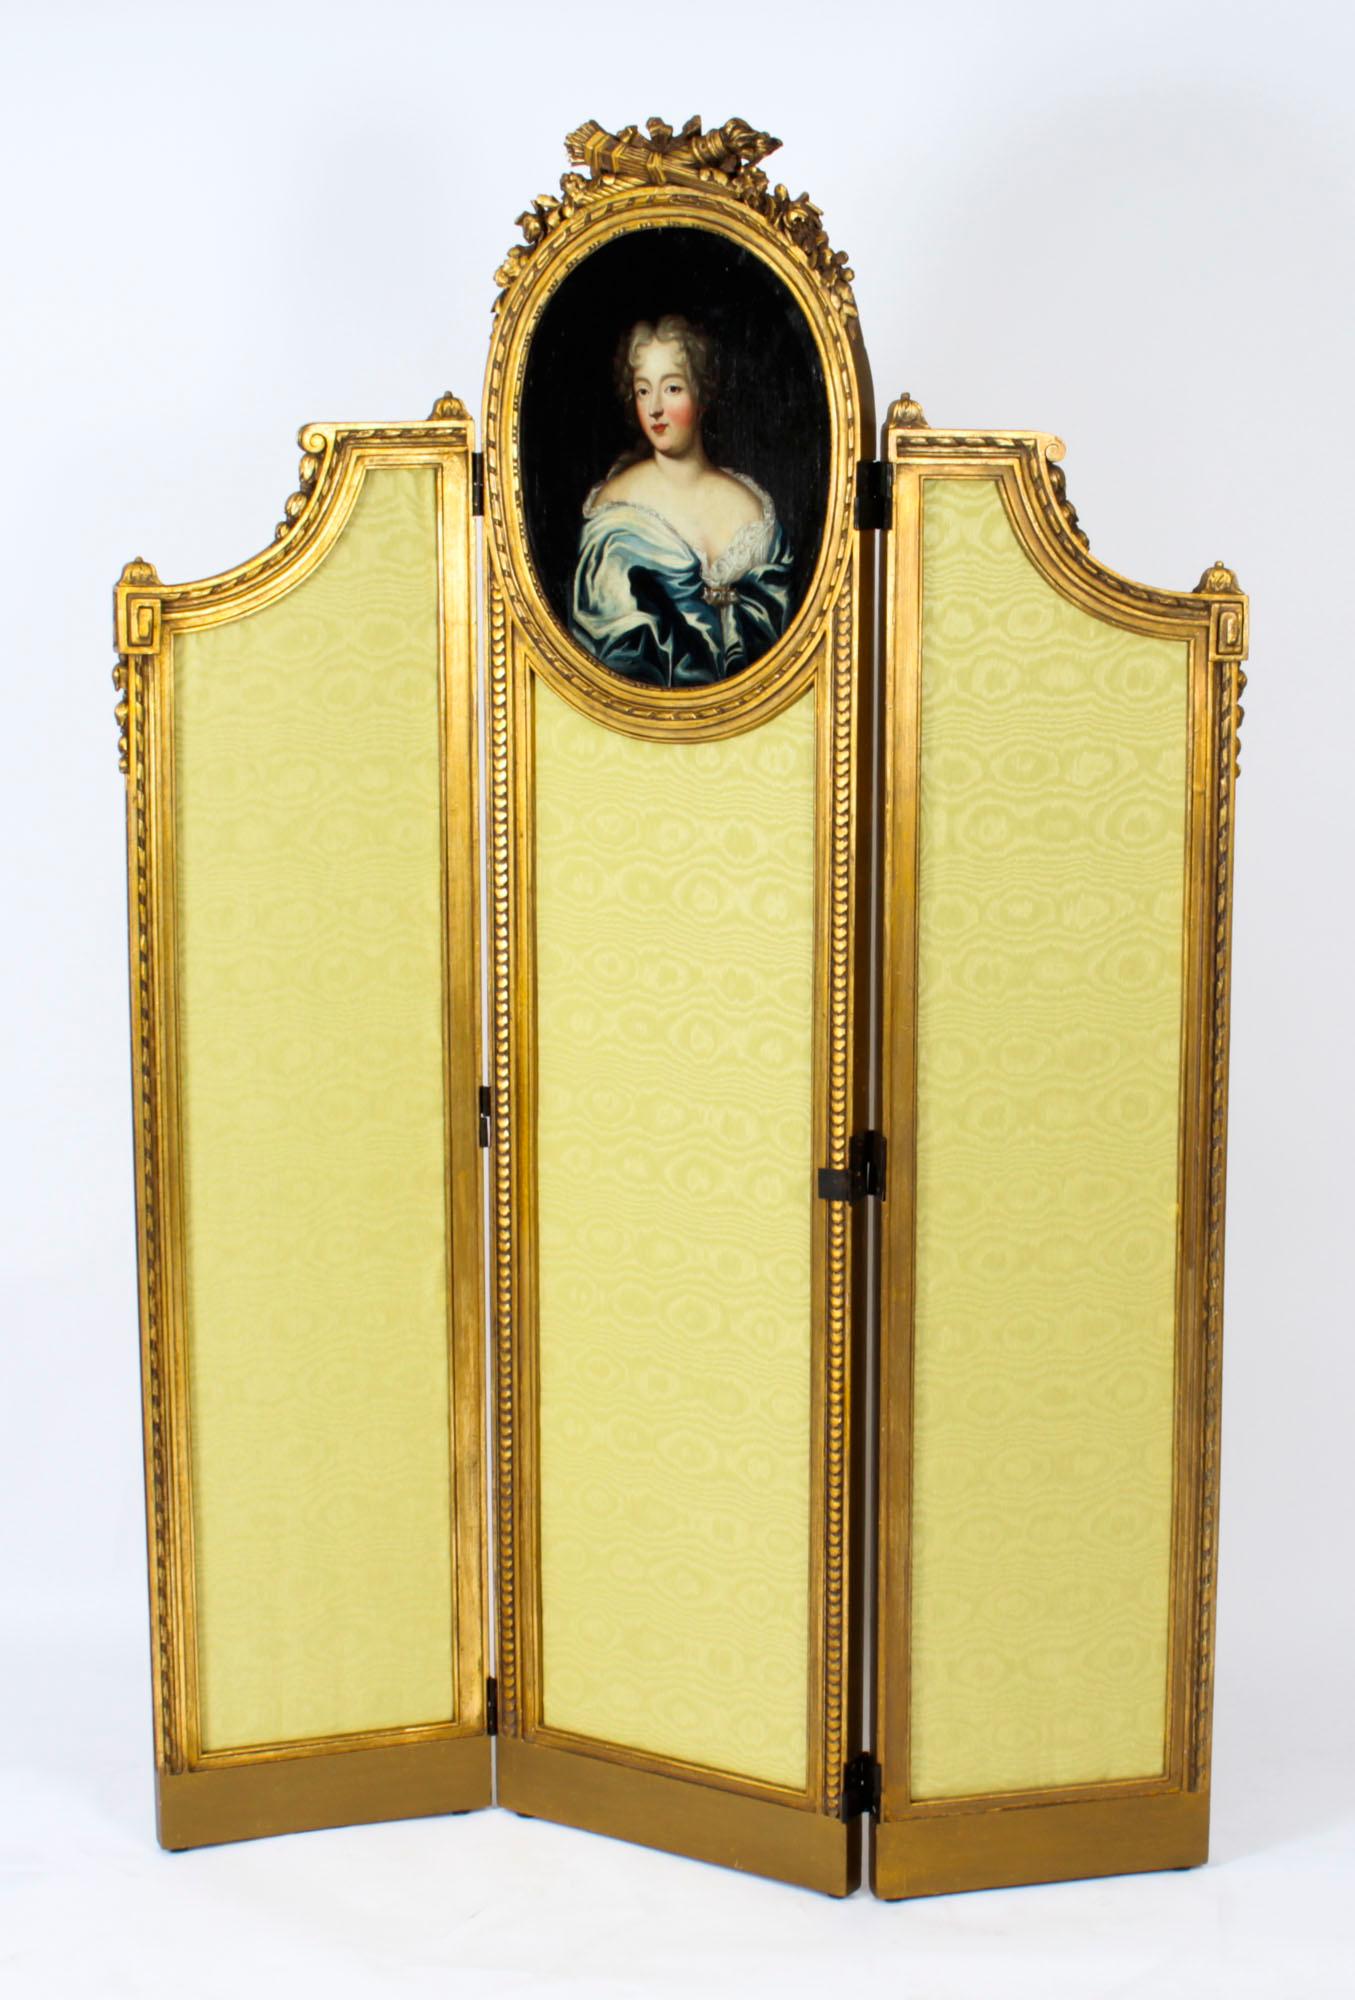 A fine beautiful antique French Louis Revival giltwood three panel dressing screen with portrait, circa 1850 in date.

The screen features three beautifully carved beaded egg and dart rectangular frames each with gold silk upholstered panels. The